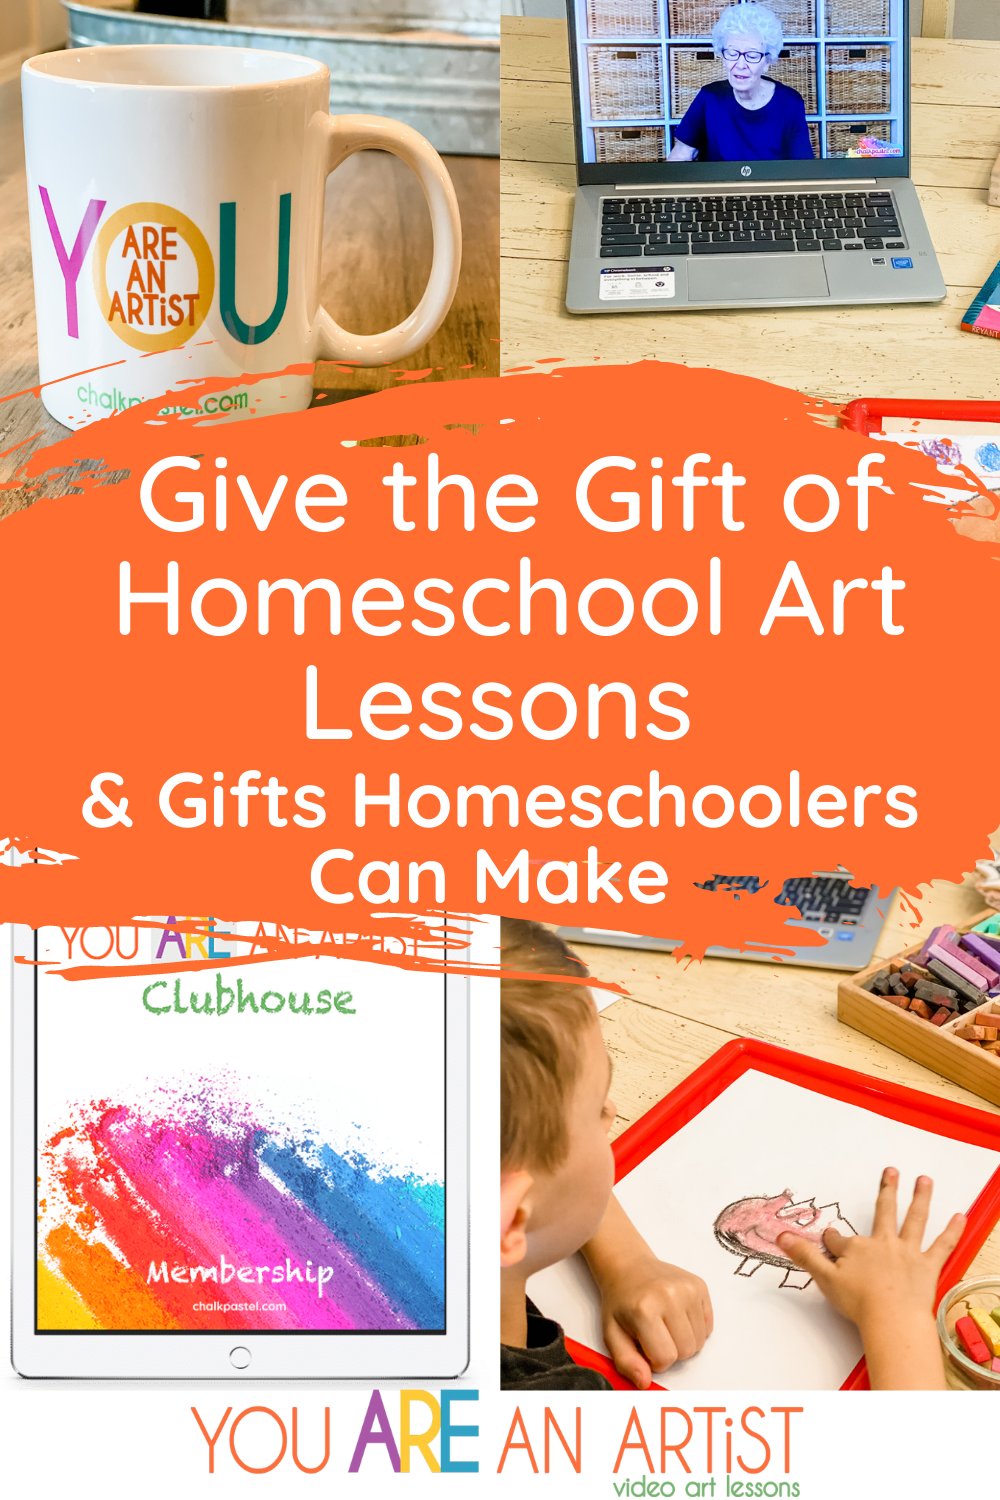 Check out these awesome ideas for homeschool gifts! Gift ideas to give and make any time of year for all ages. #homeschoolgifts #homeschoolart #onlineartlessons #artforkids #artcurriculum 